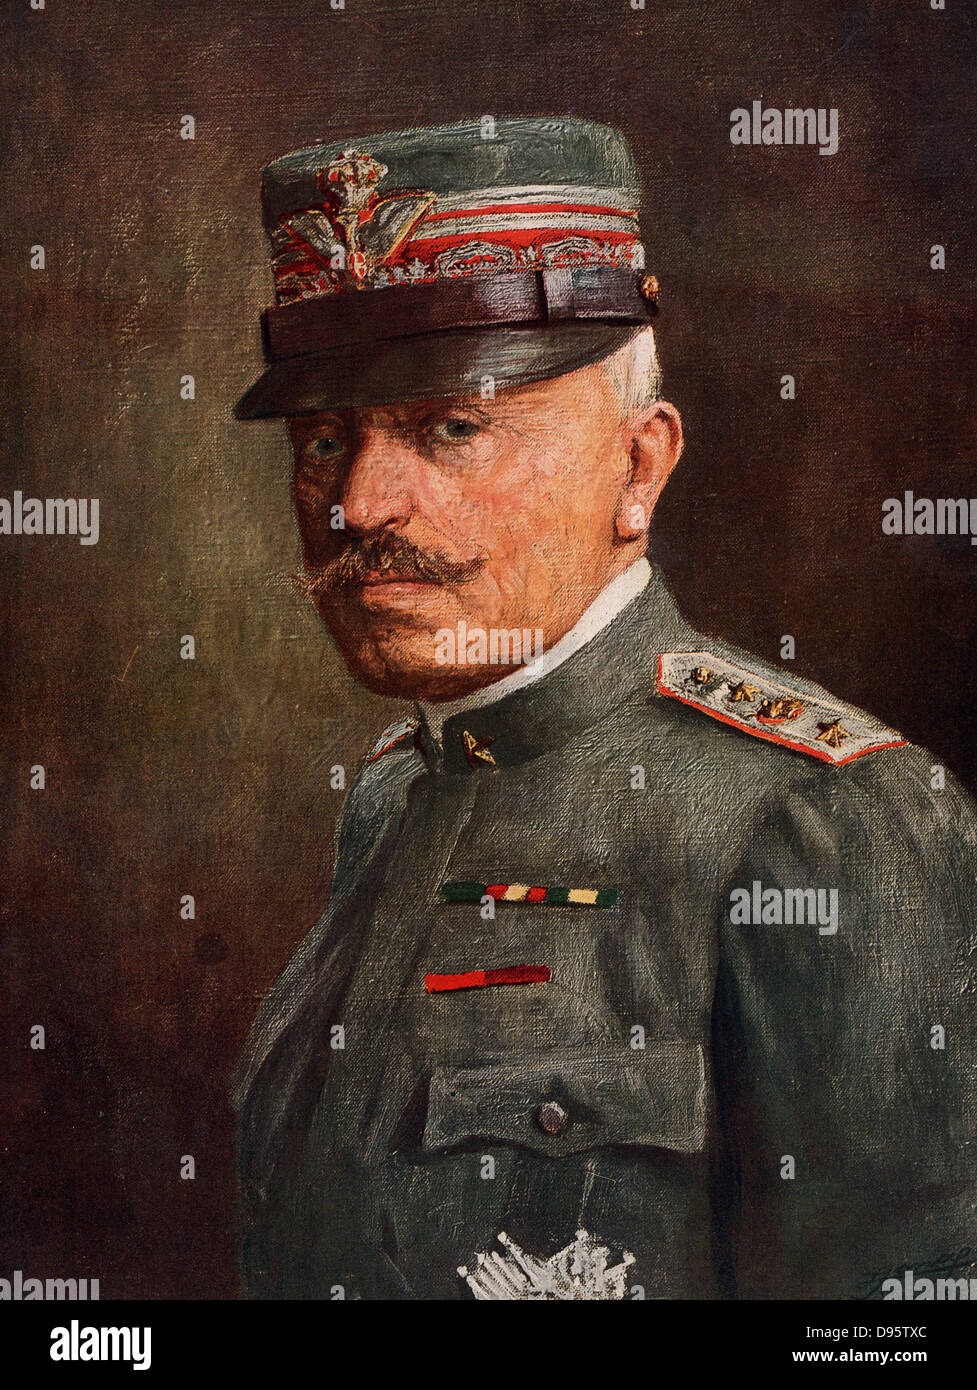 General Luigi Cadorna (1850-1928) Italian army officer,  Chief-of-staff of the Italian army at the outbreak of the First World War until his dismissal after the defeat of the Italians at Caporetto in October 1917. Stock Photo